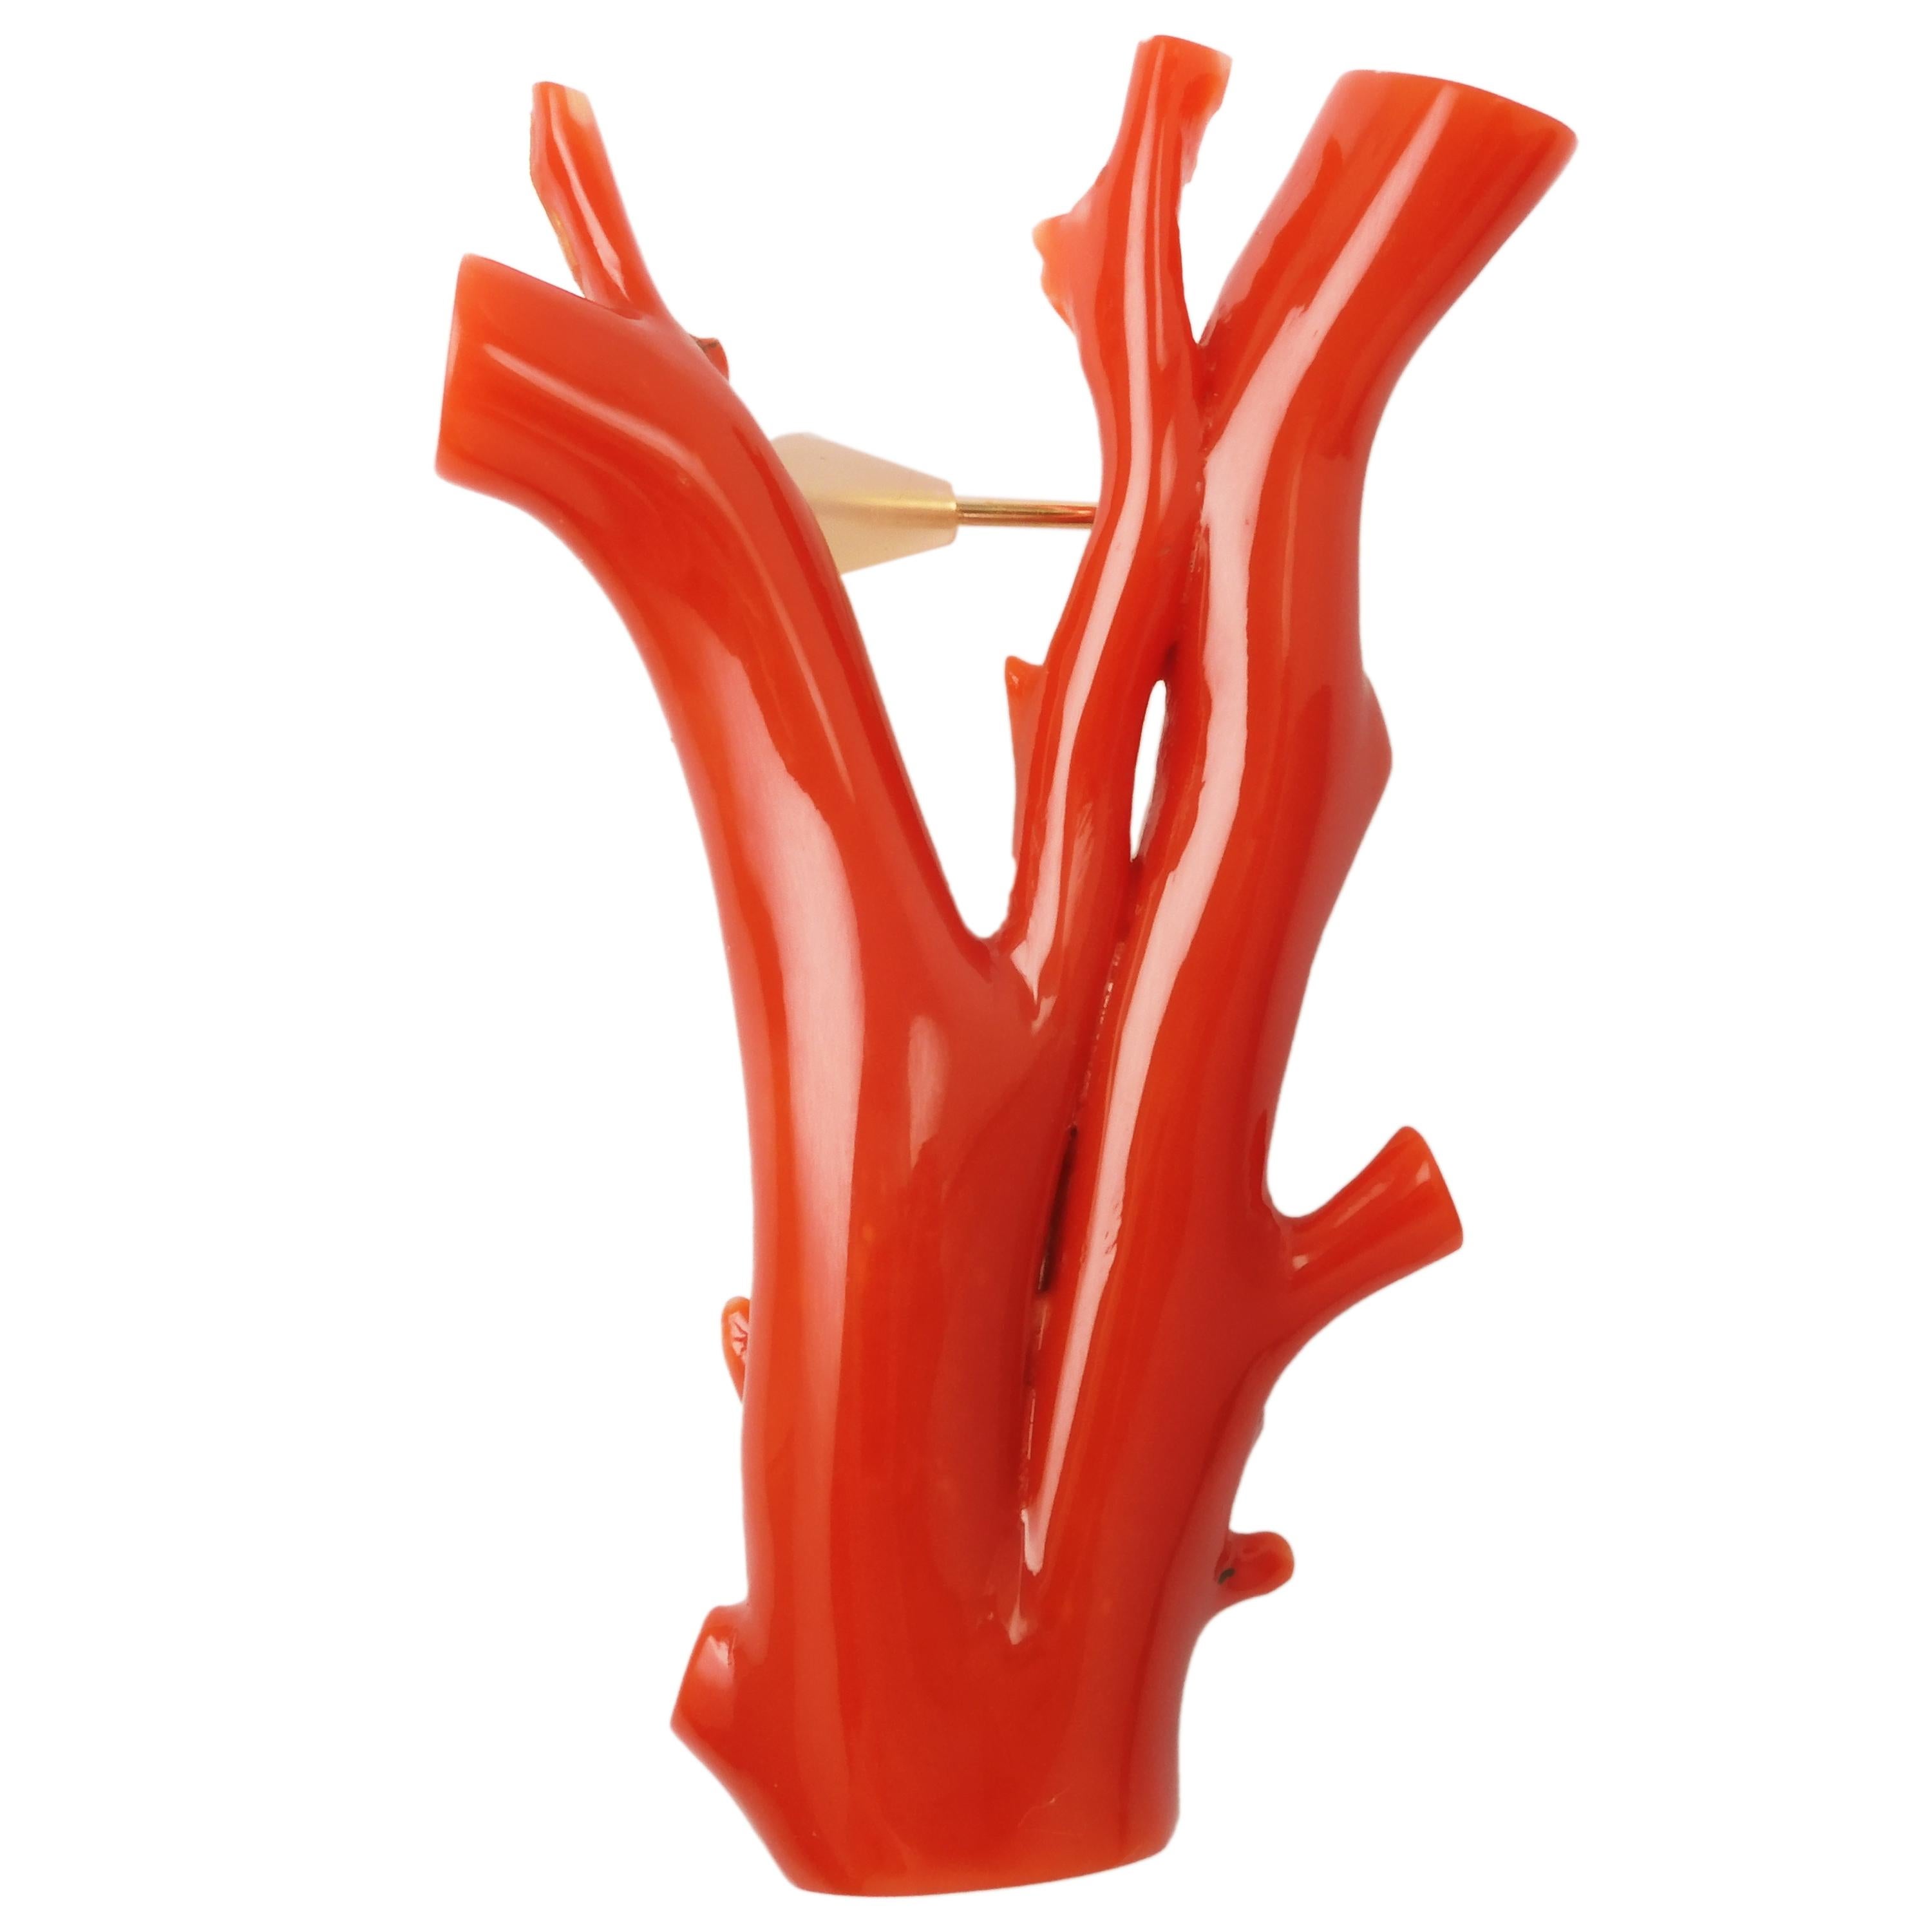 Very delicate and fine red coral branch with an 18 karat yellow gold pin to make a stylish brooch for use on special occasions. This brooch has been made by cutting well-shaped branches from red coral logs and carefully polished. The 18 karat gold